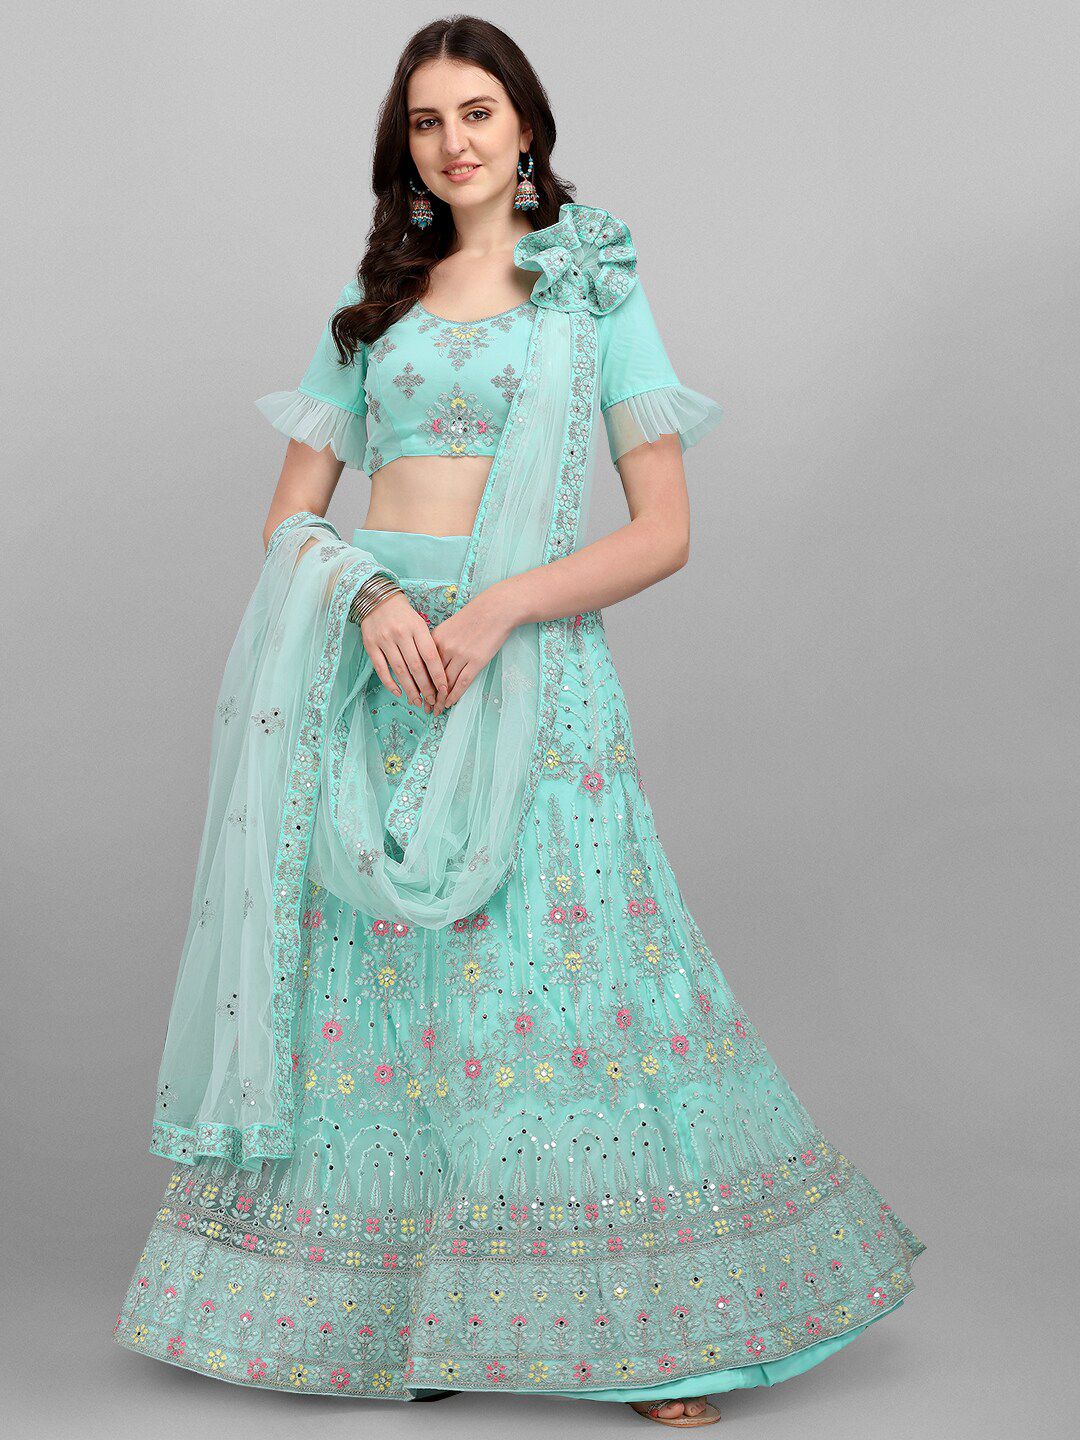 V SALES Blue & Pink Embroidered Mirror Work Semi-Stitched Lehenga & Unstitched Blouse With Dupatta Price in India